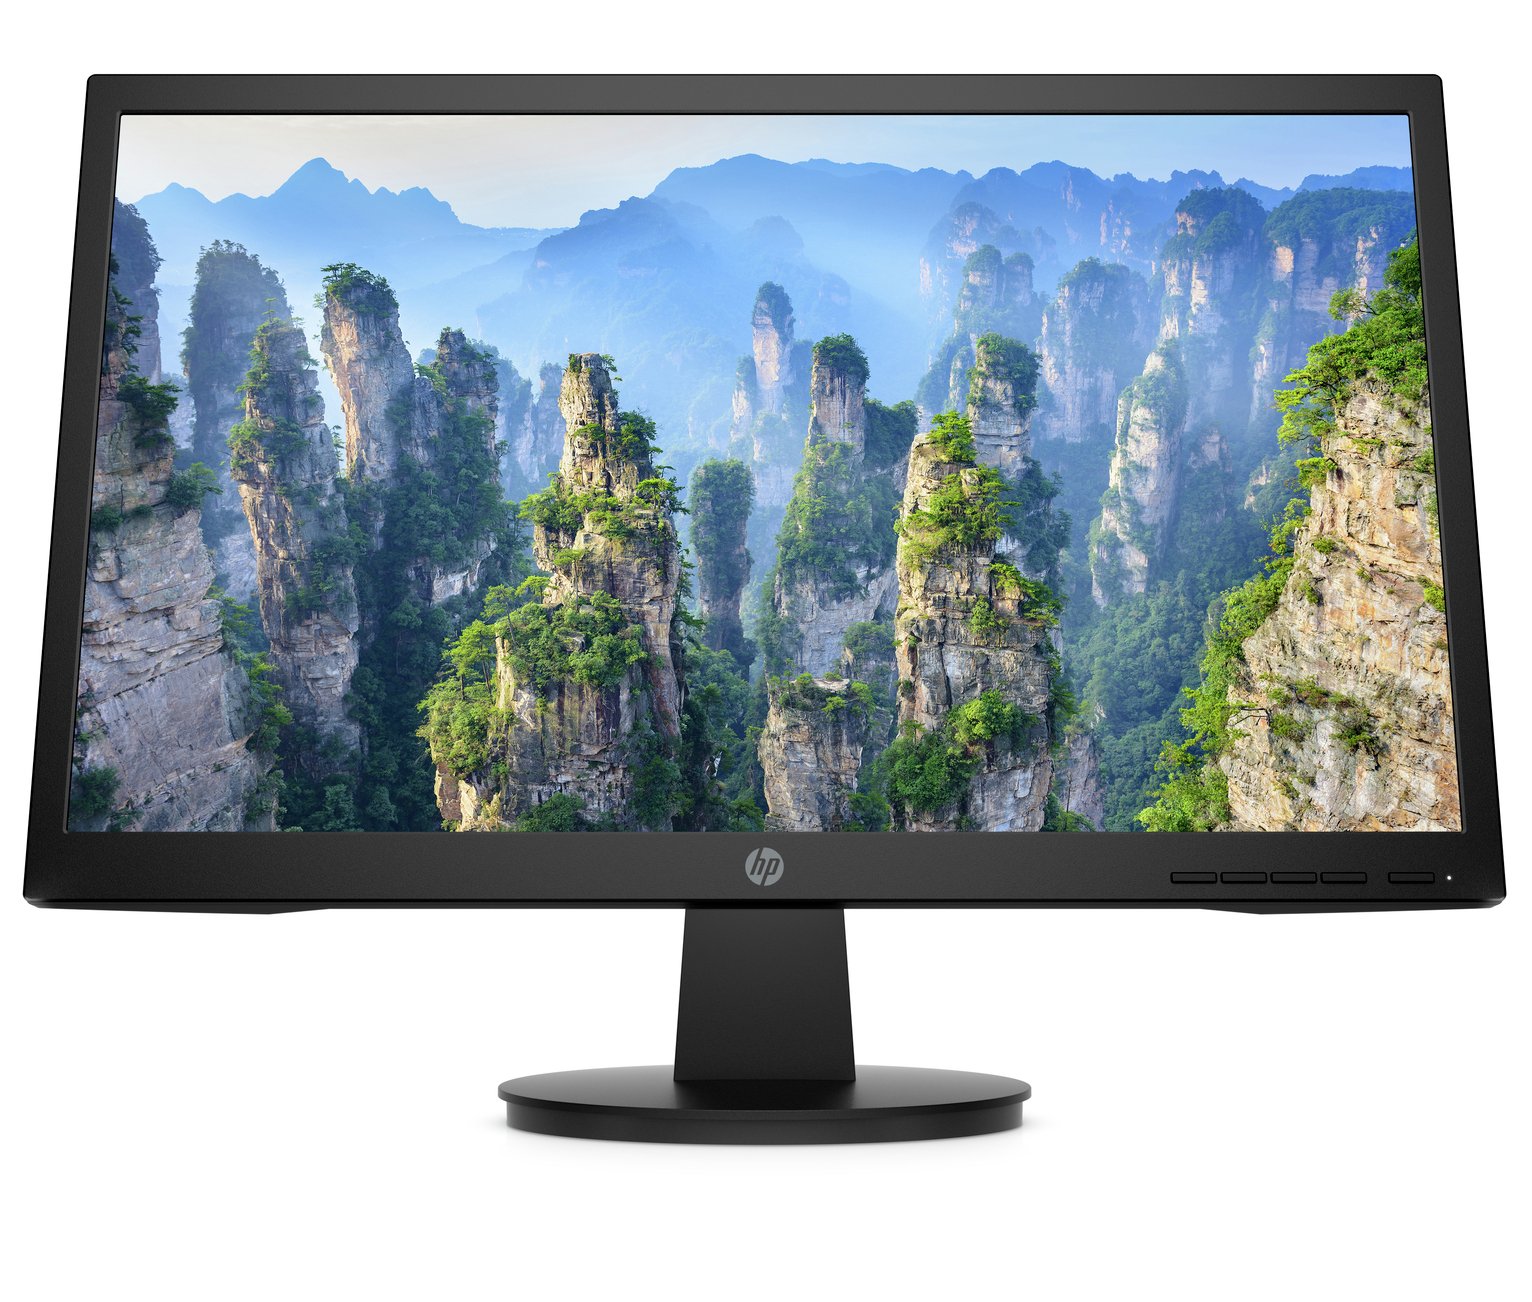 HP V22 22 Inch 60Hz FHD Monitor Review